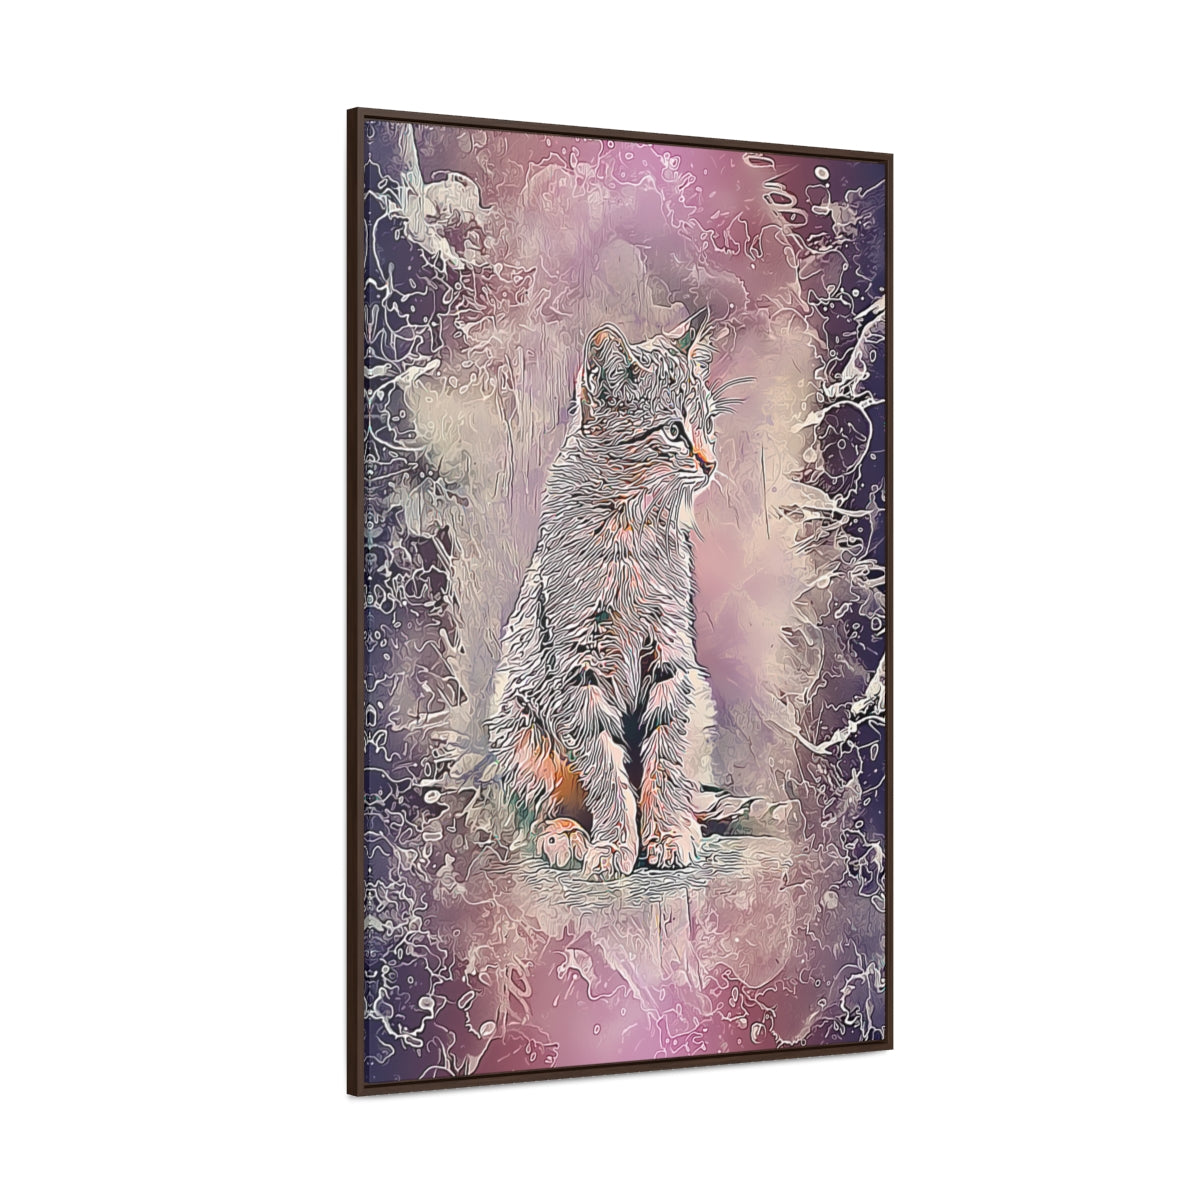 Pet Pics - Whimsical Abstract- Vertical Framed Canvas